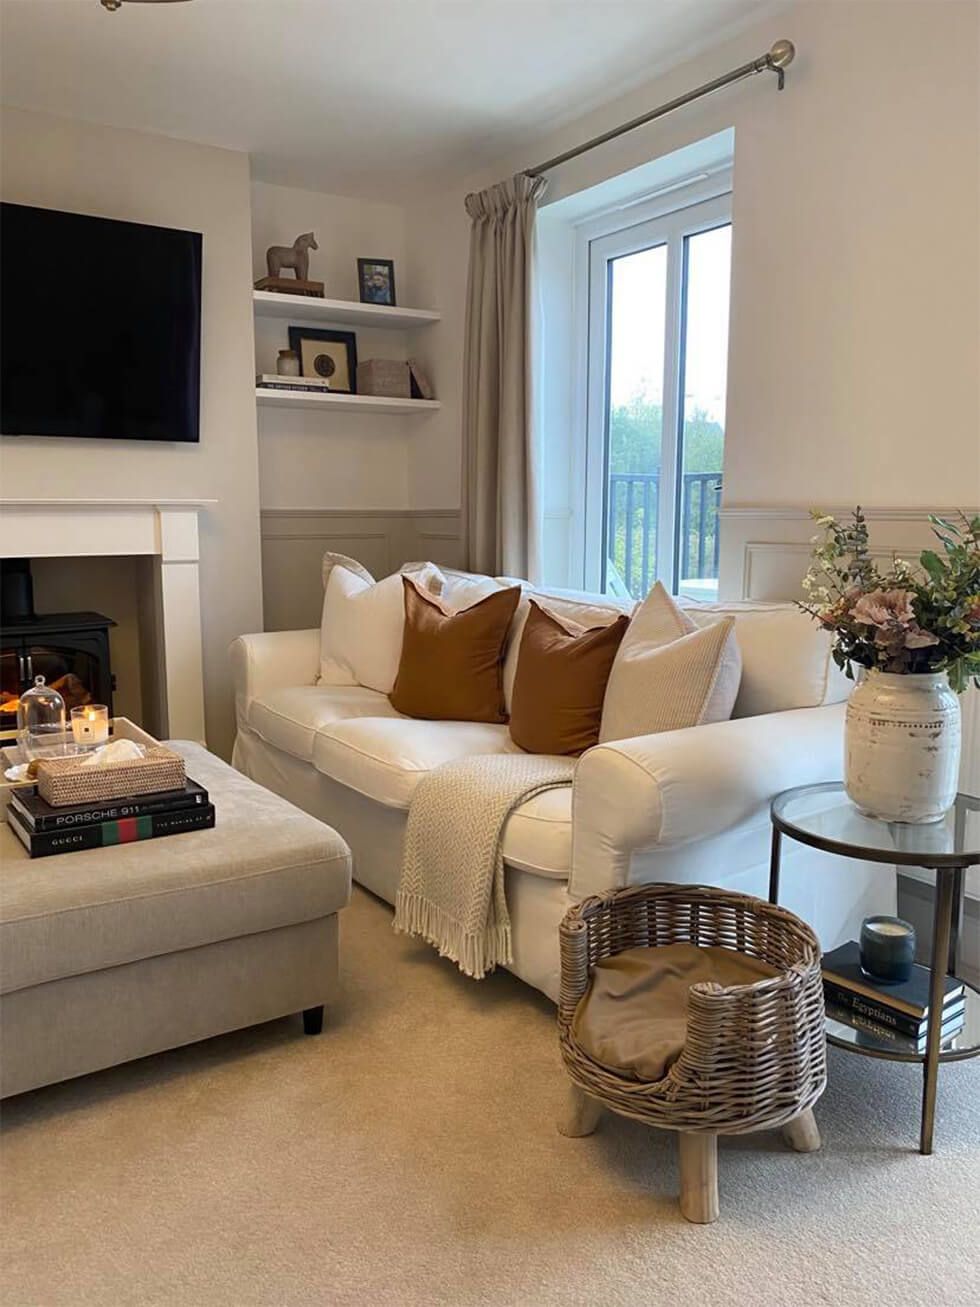 A cosy living room with a white sofa and rustic accessories